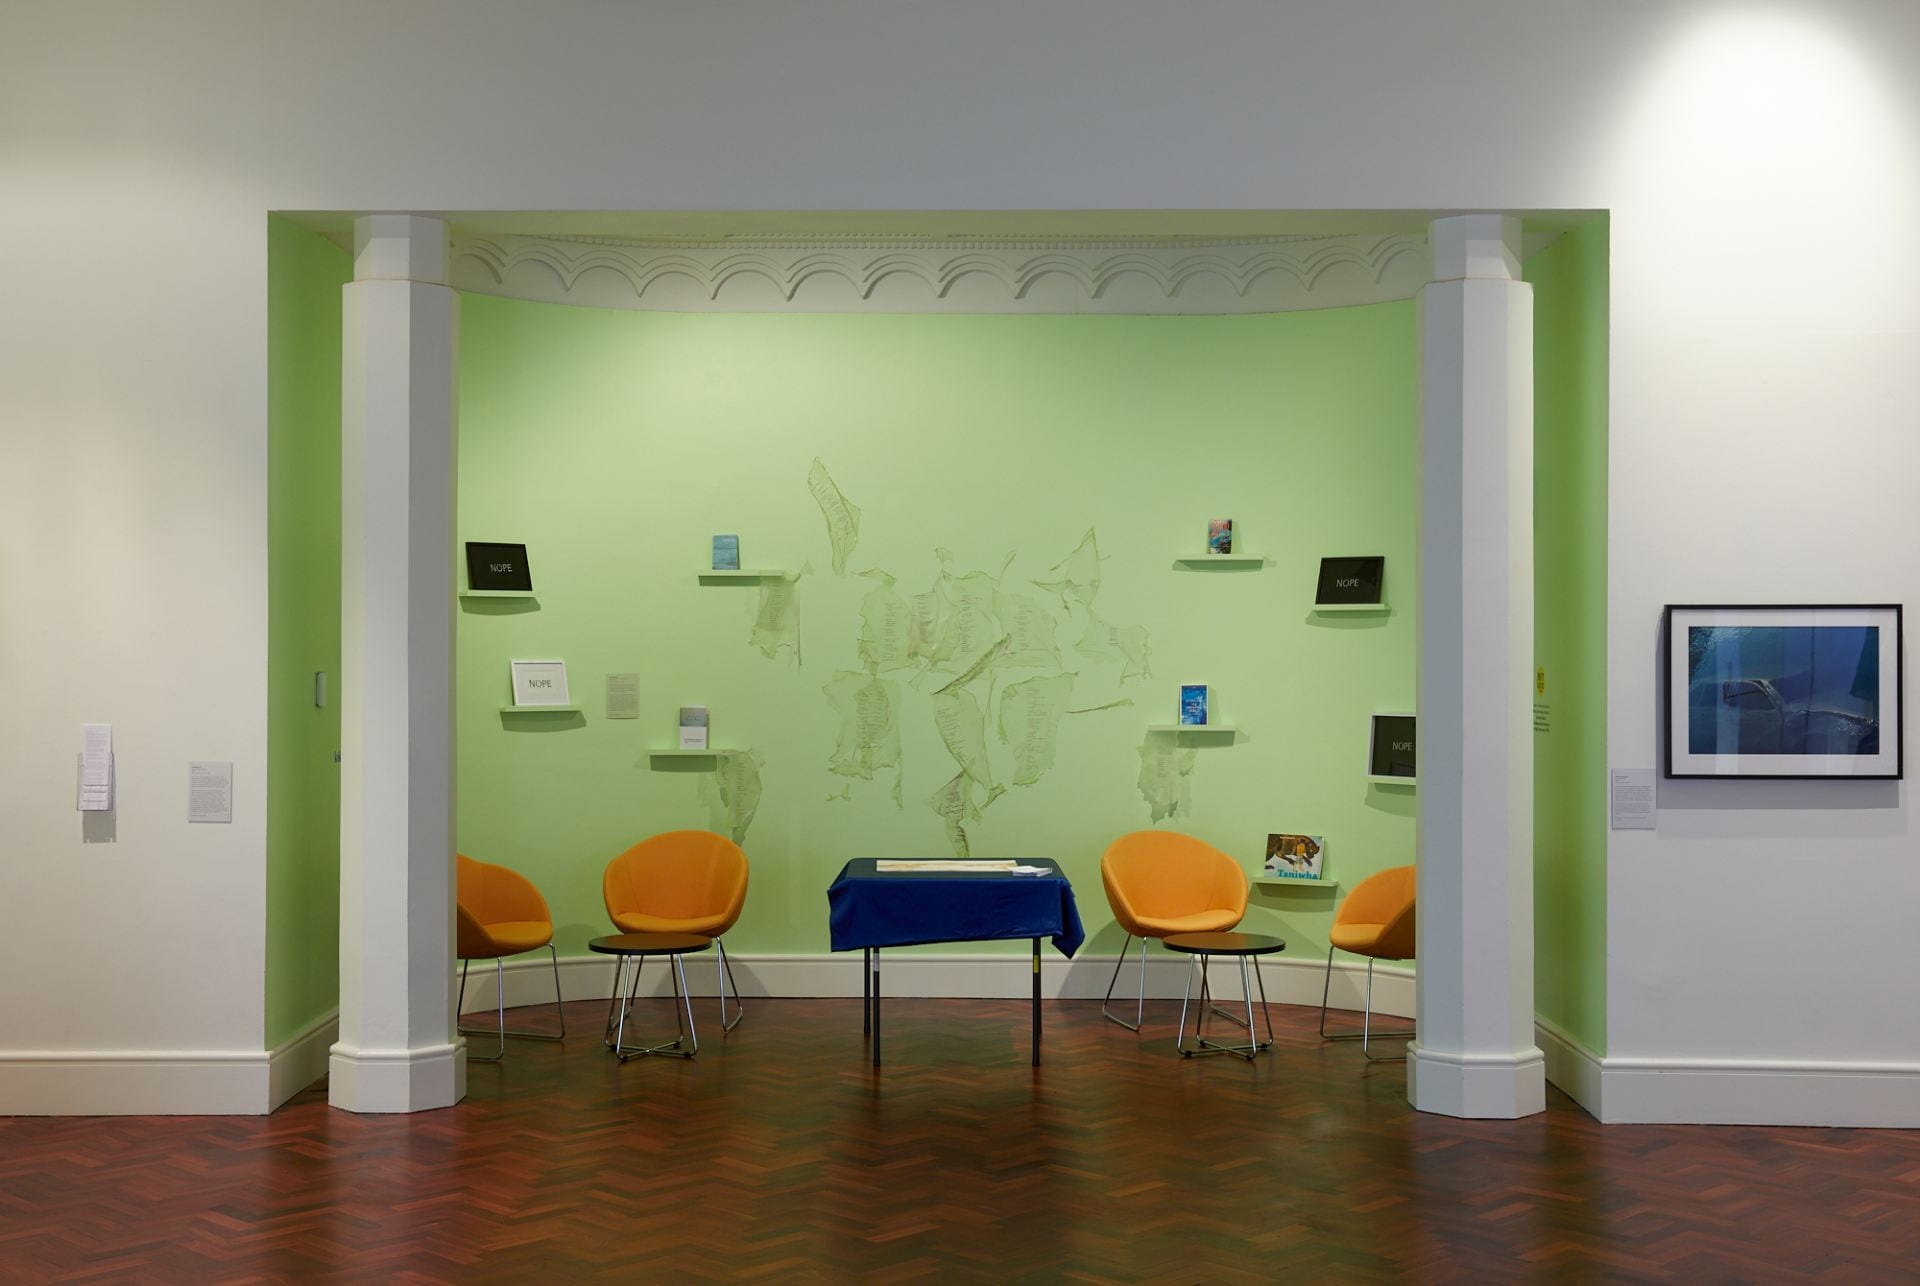 In the centre of an alcove space, pieces of very thin translucent cellulose are pasted to a green wall. The cellulose has text printed on it.